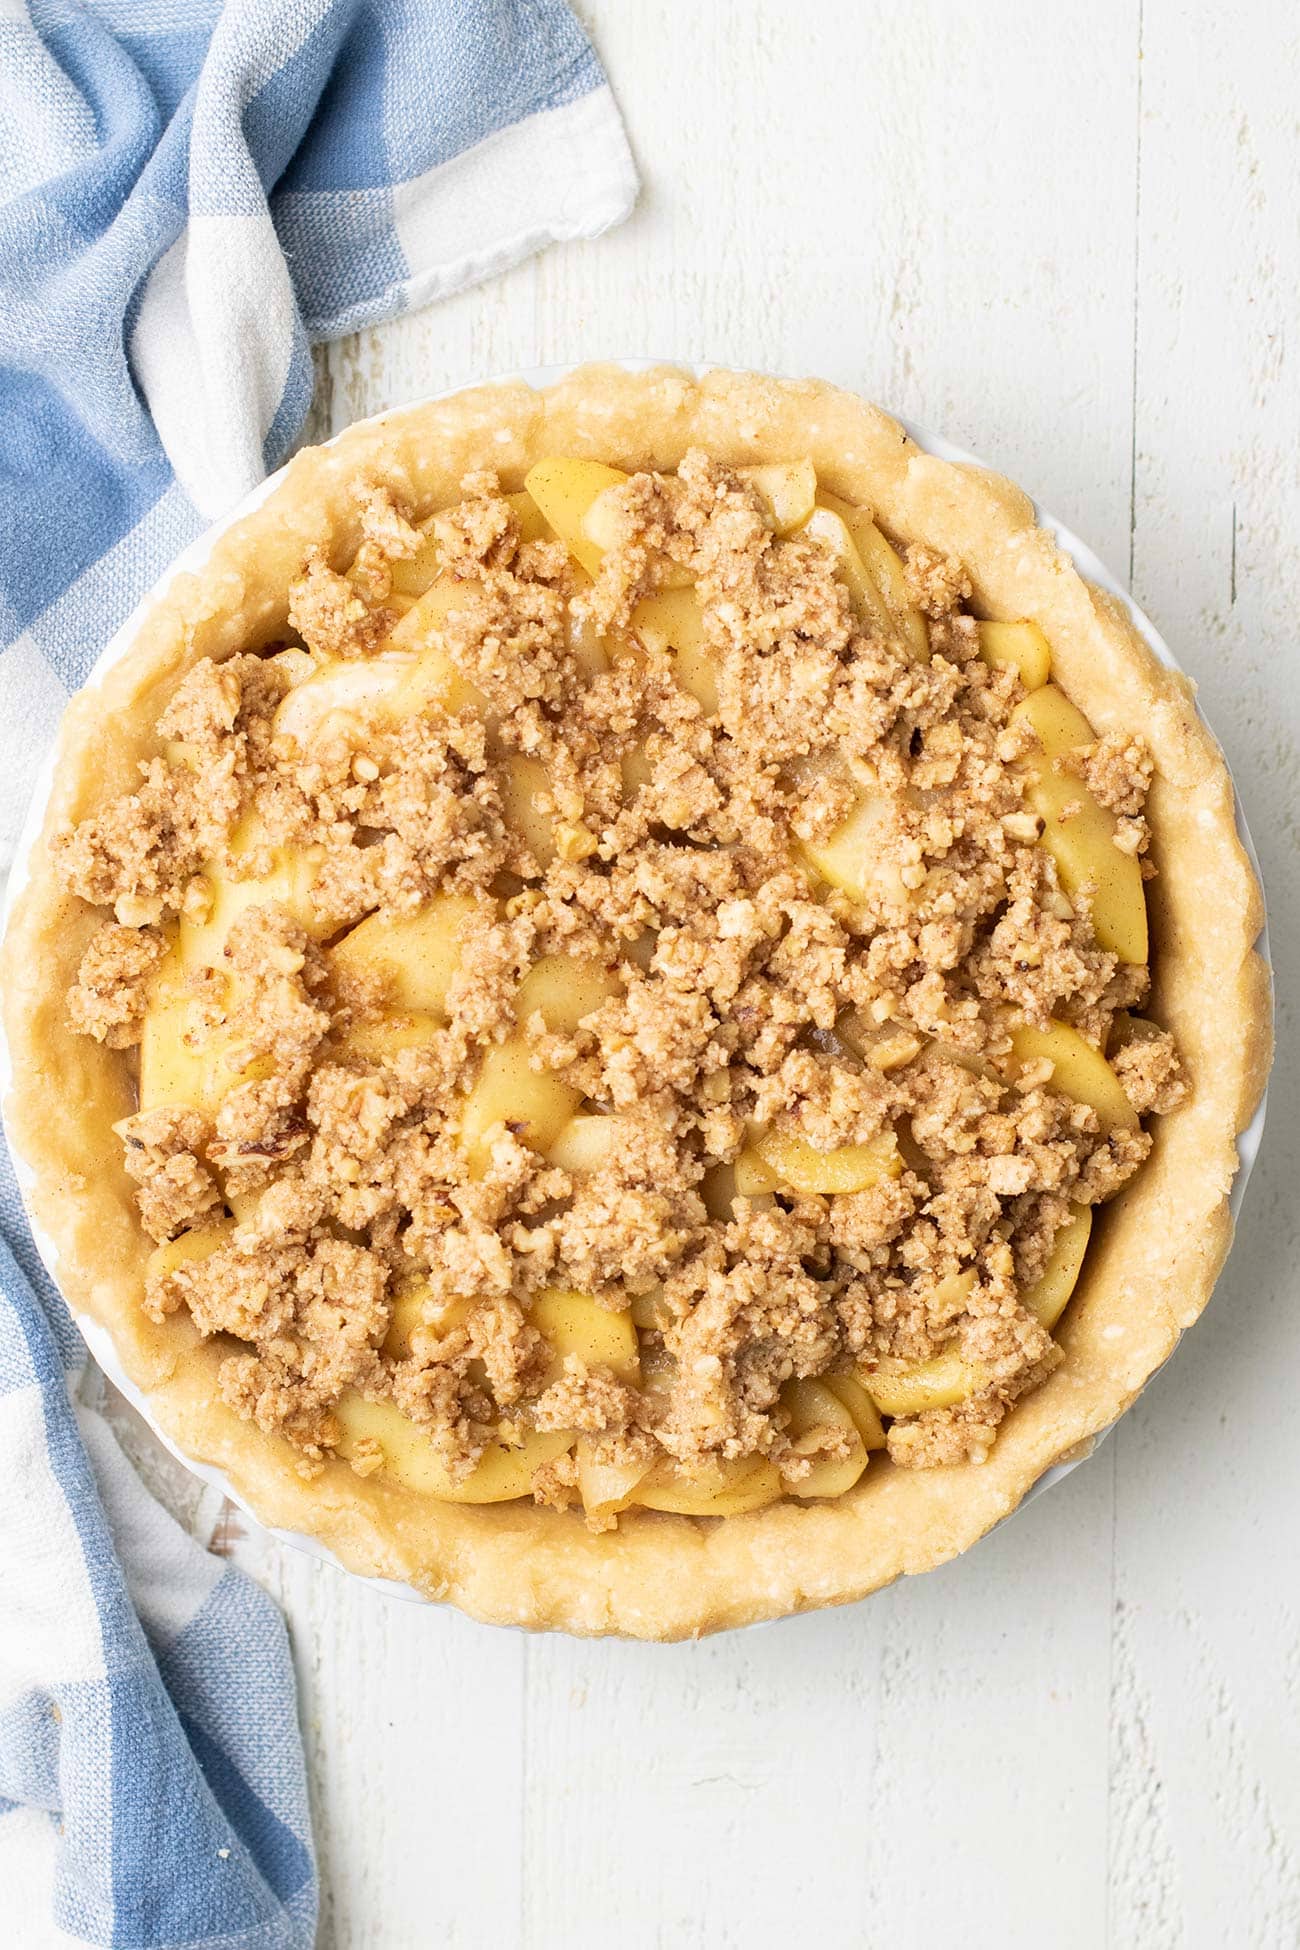 An apple pie topped with a crumble topping.